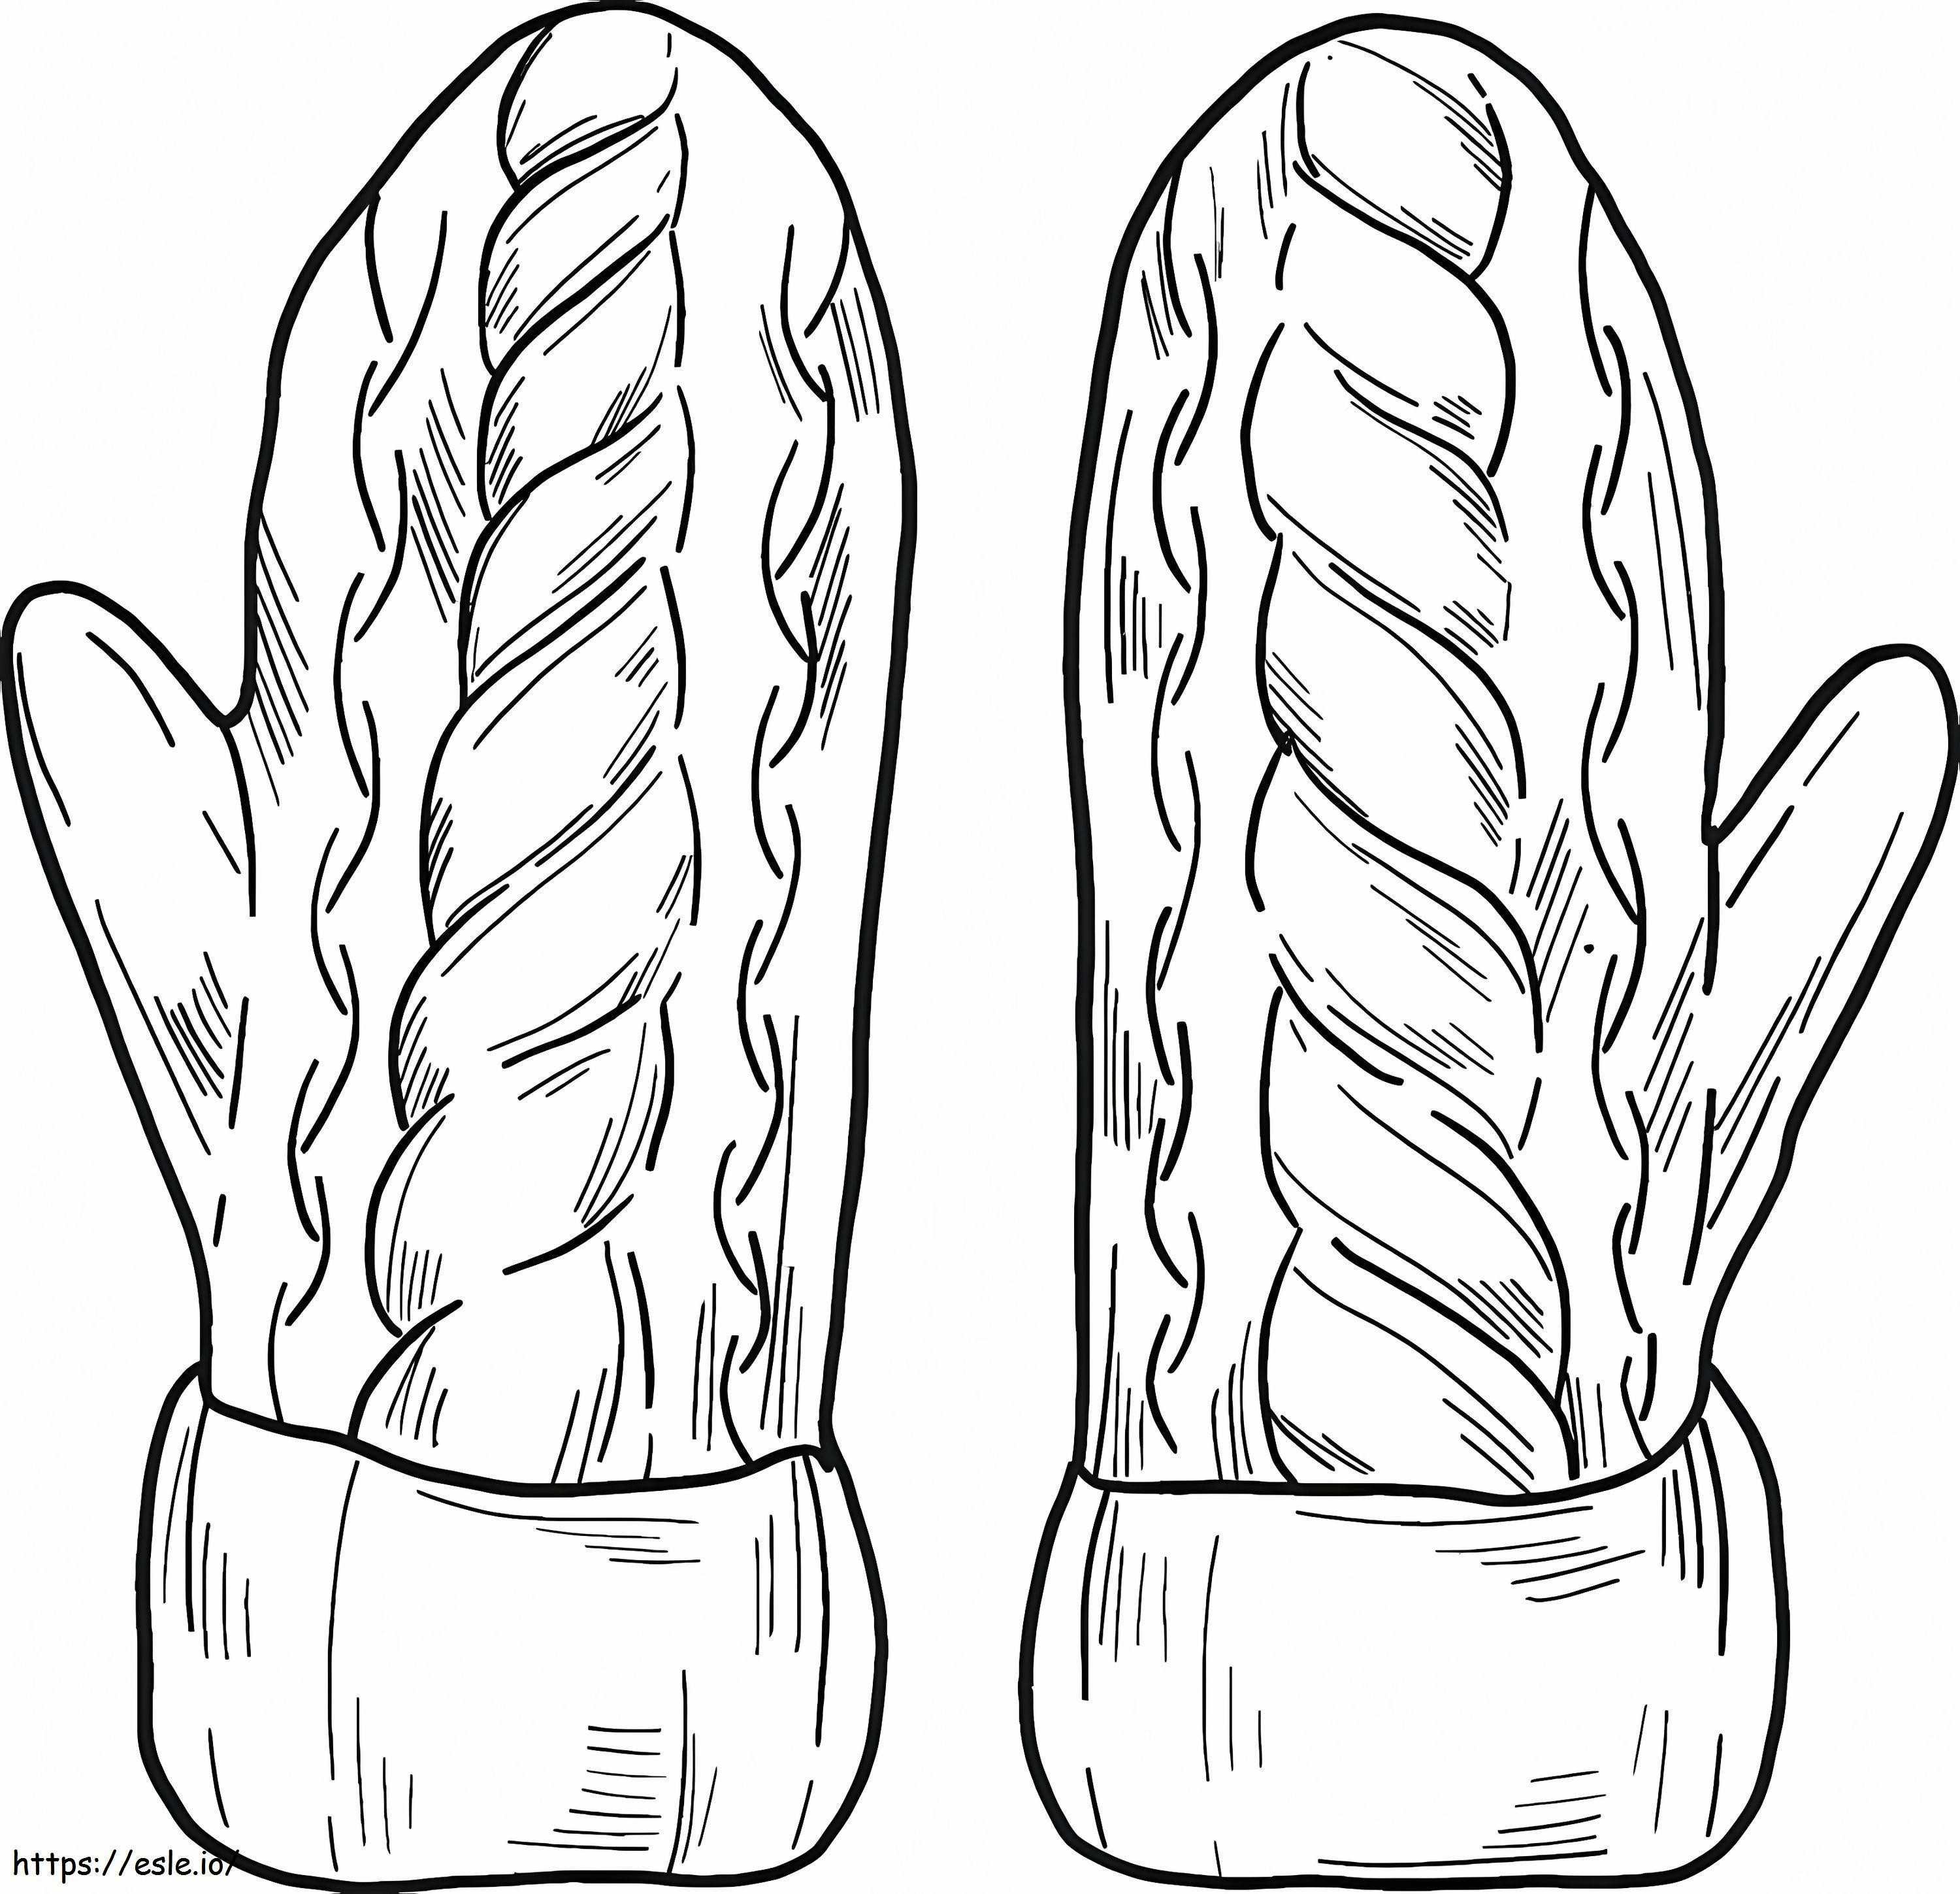 Mittens For Xmas coloring page